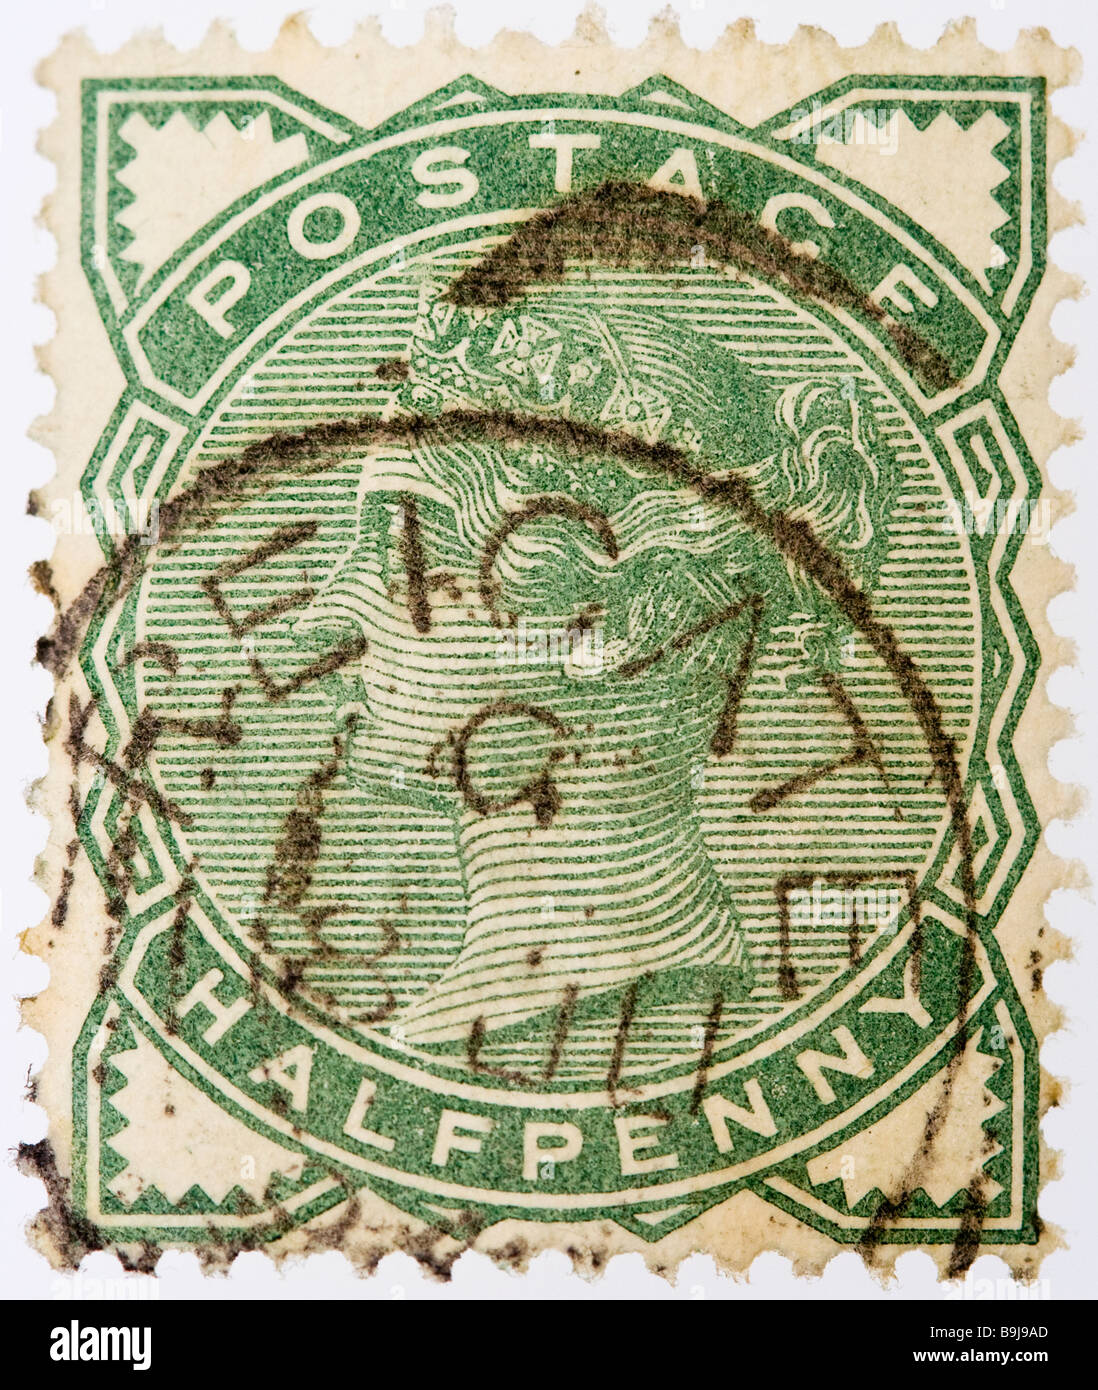 Close up of ½d, half penny green Victorian British Postal stamp on white background 1880 SG 164 used. Round postmarked Reigate. Stock Photo